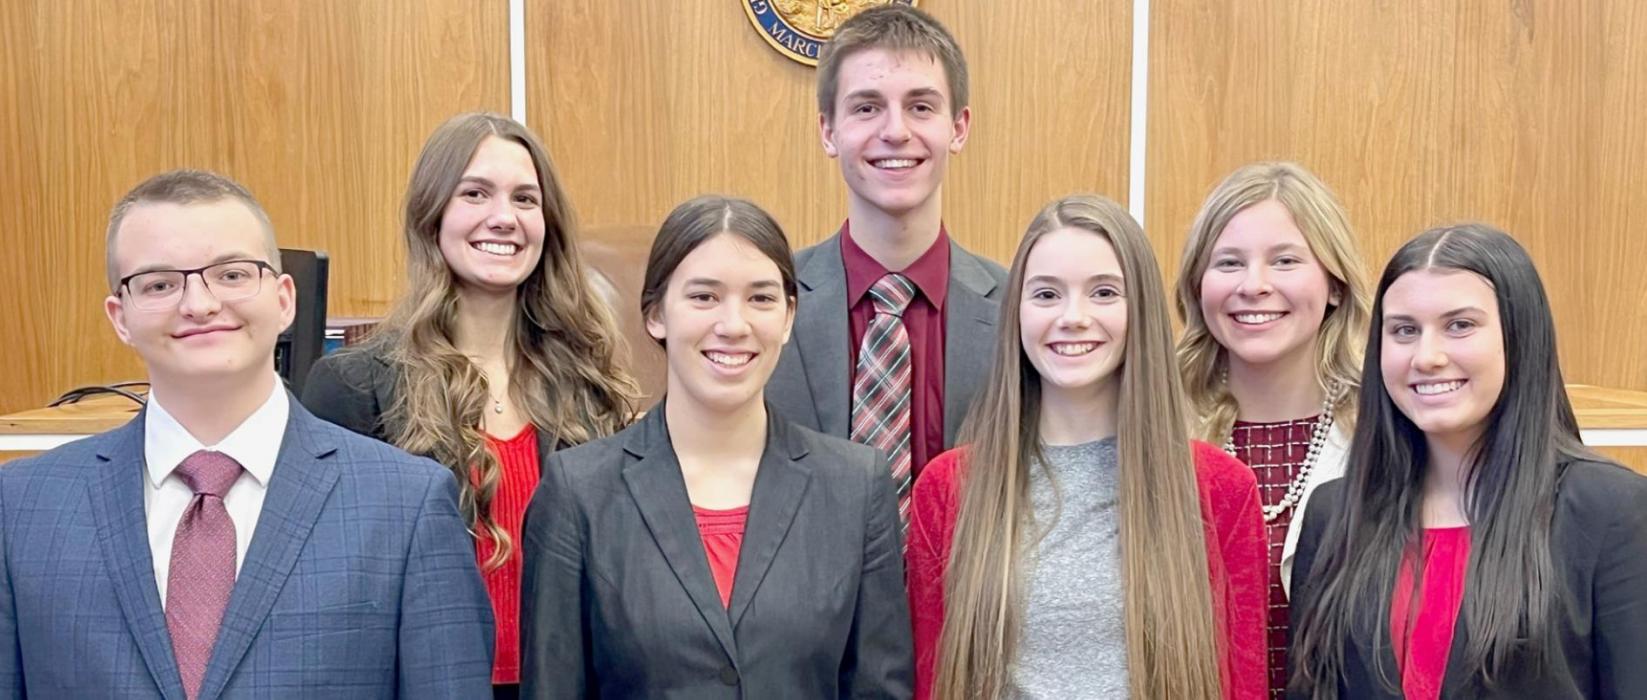 Qualifying members of the Ainsworth Blue Mock Trial team are: (Front Row - Left to Right): Gavin Olinger, Katherine Kerrigan, Taylor Allen and Dakota Stutzman; (Back Row - Left to Right): Haley Schroedl, Benjamin Flynn and Alyssa Erthum.